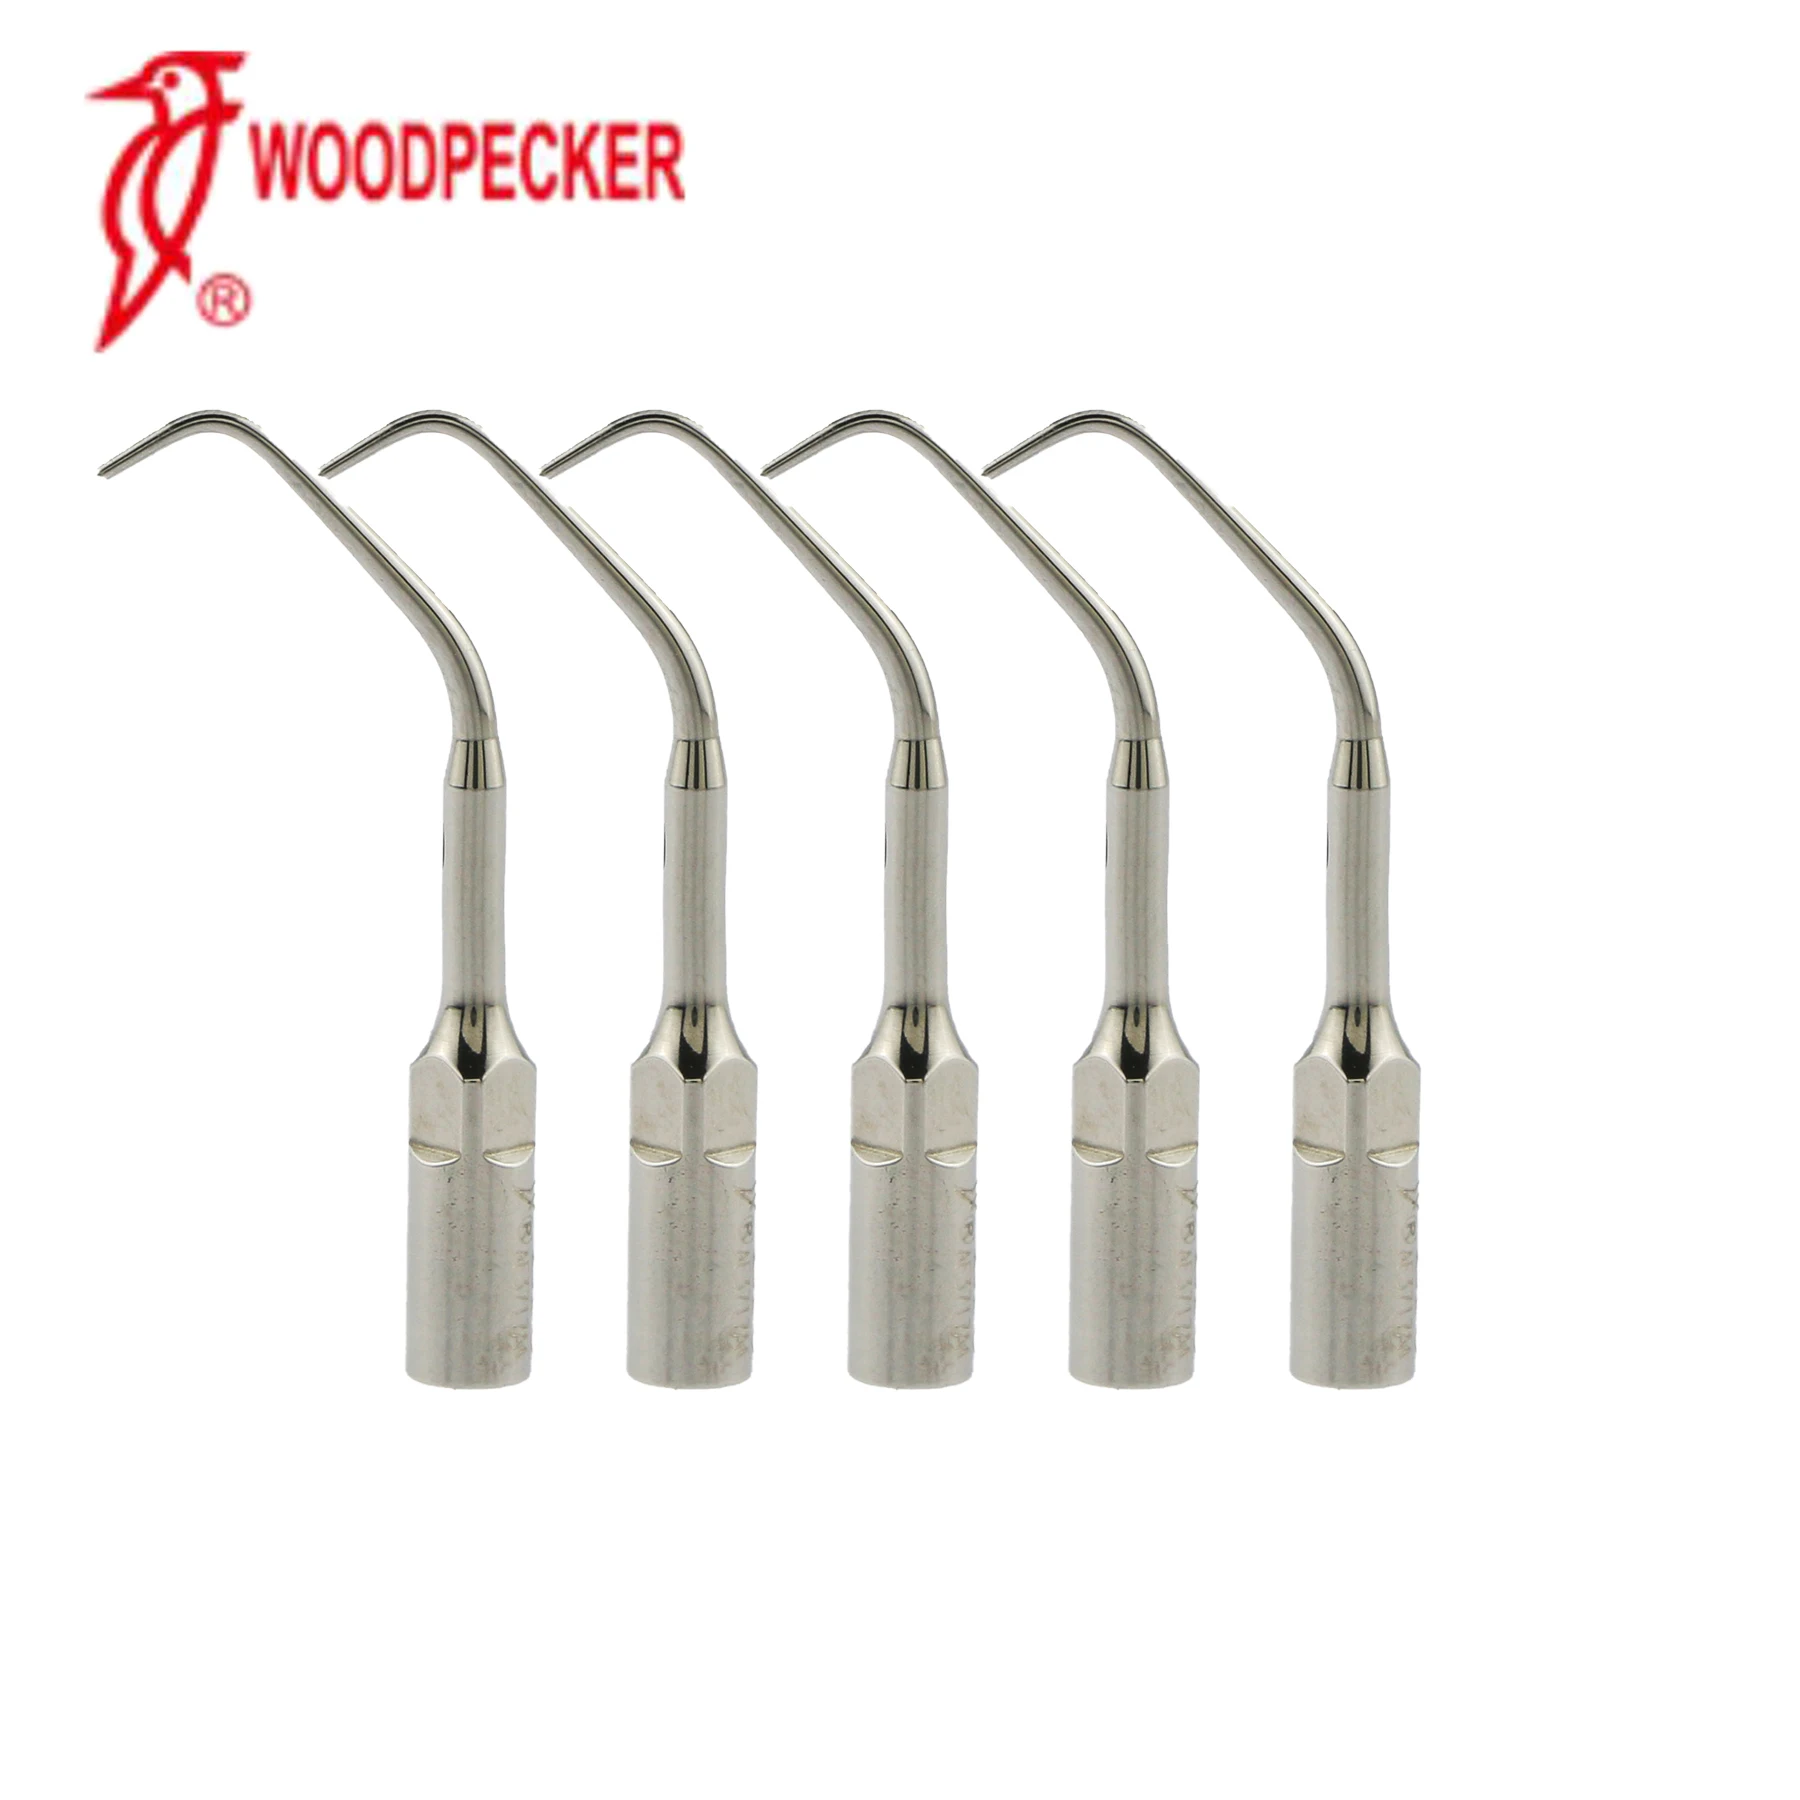 Woodpecker Dental Ultrasonic Scaler Tips Endodontic Endo Tip Scaling  E10 Series Compatible With UDS EMS